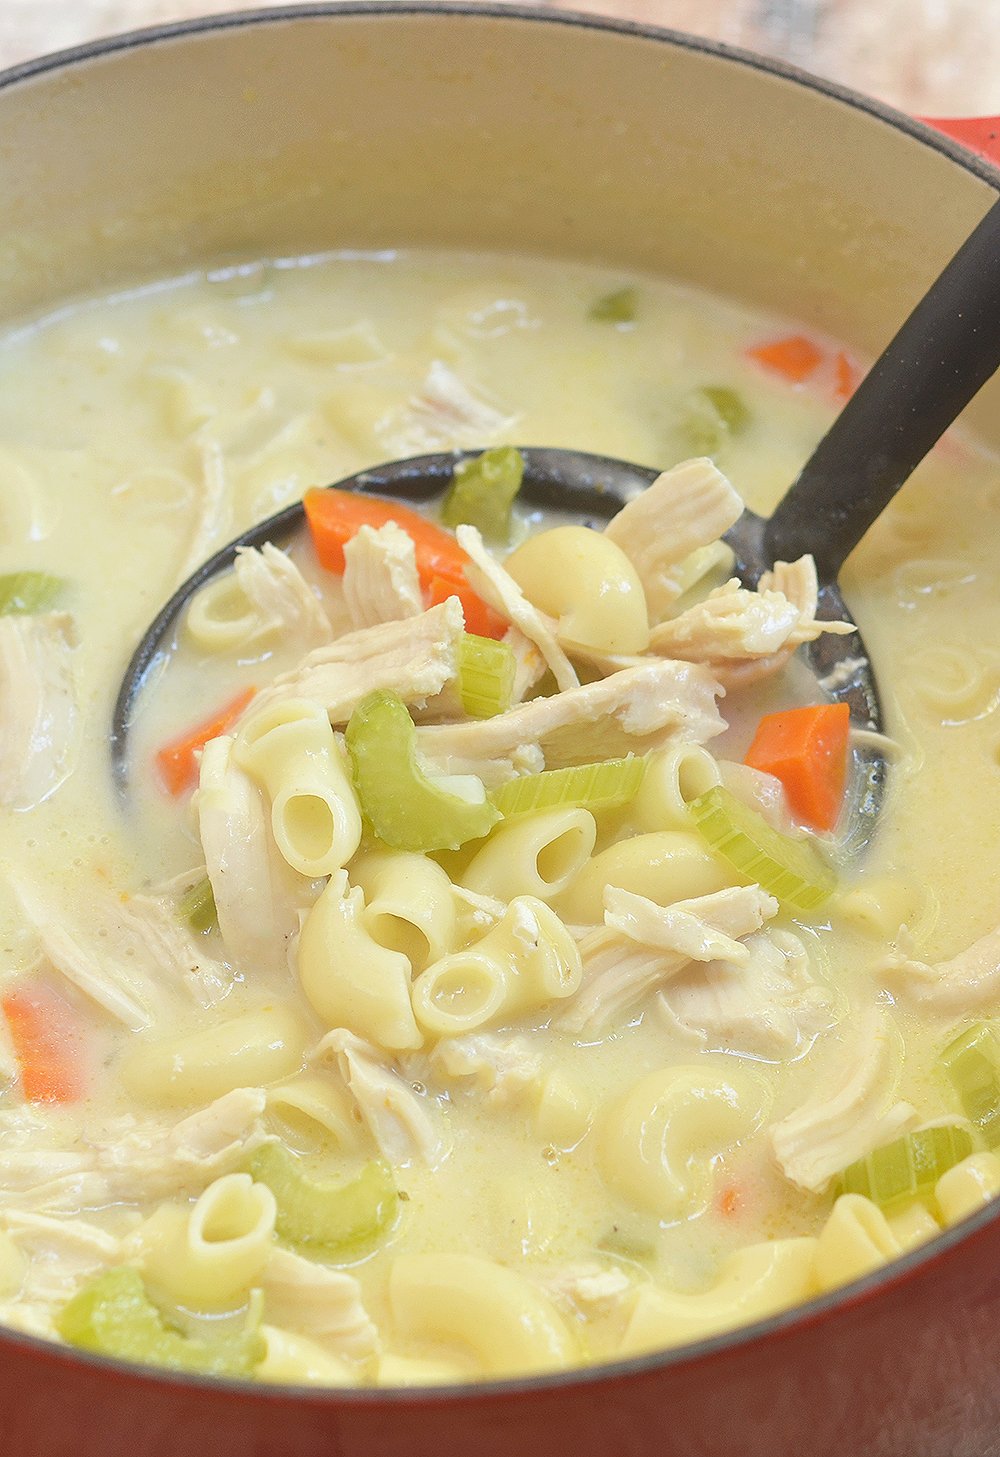 Easy Creamy Chicken Noodle Soup is the epitome of comfort food! Rich, creamy and loaded with moist chicken, noodles, tender vegetables, it's the best thing to warm up with all year round!